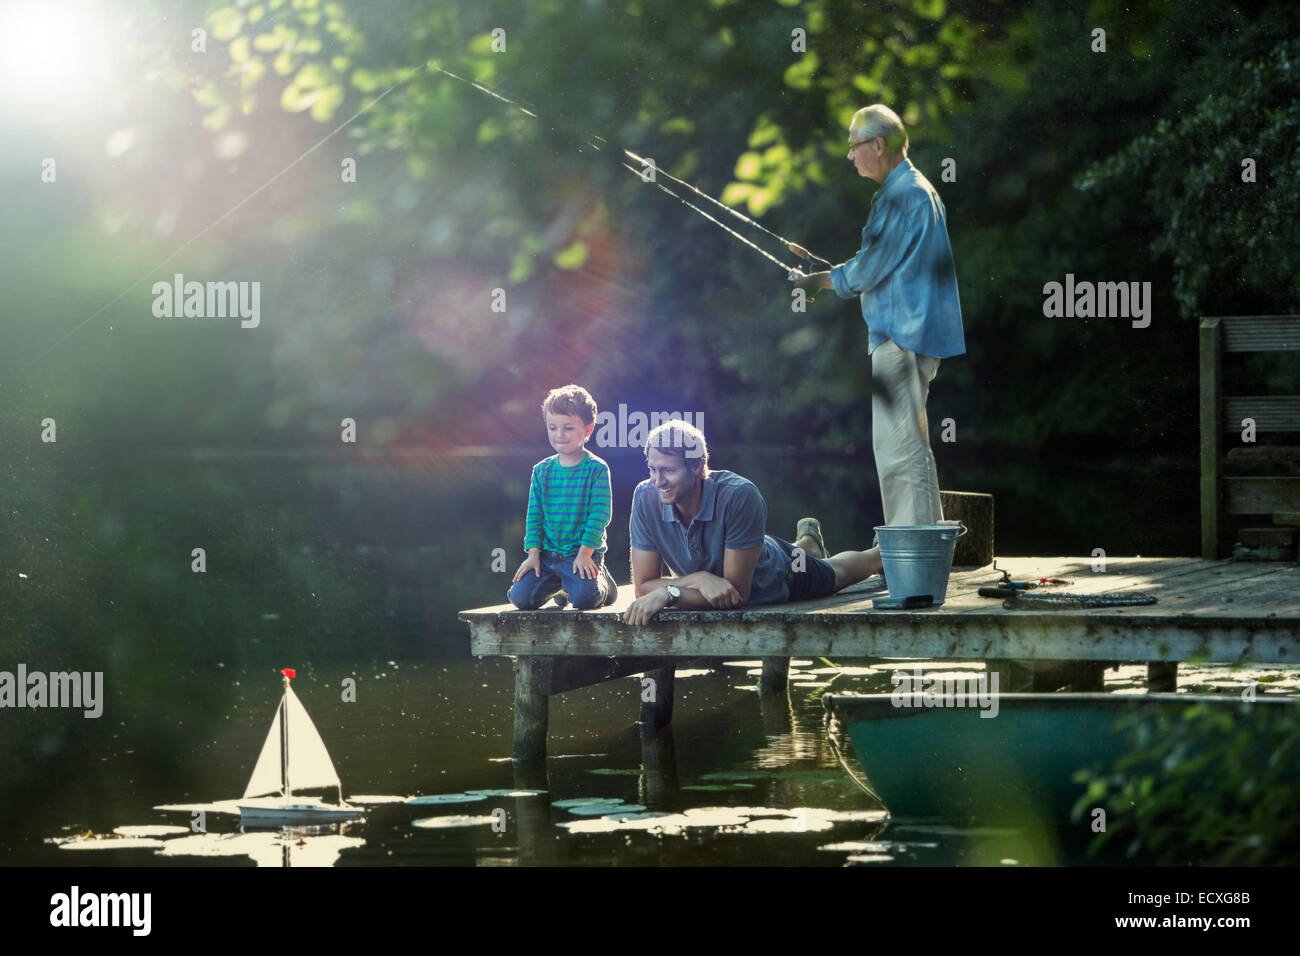 Boy fishing and playing with toy sailboat with father and grandfather at lake Stock Photo